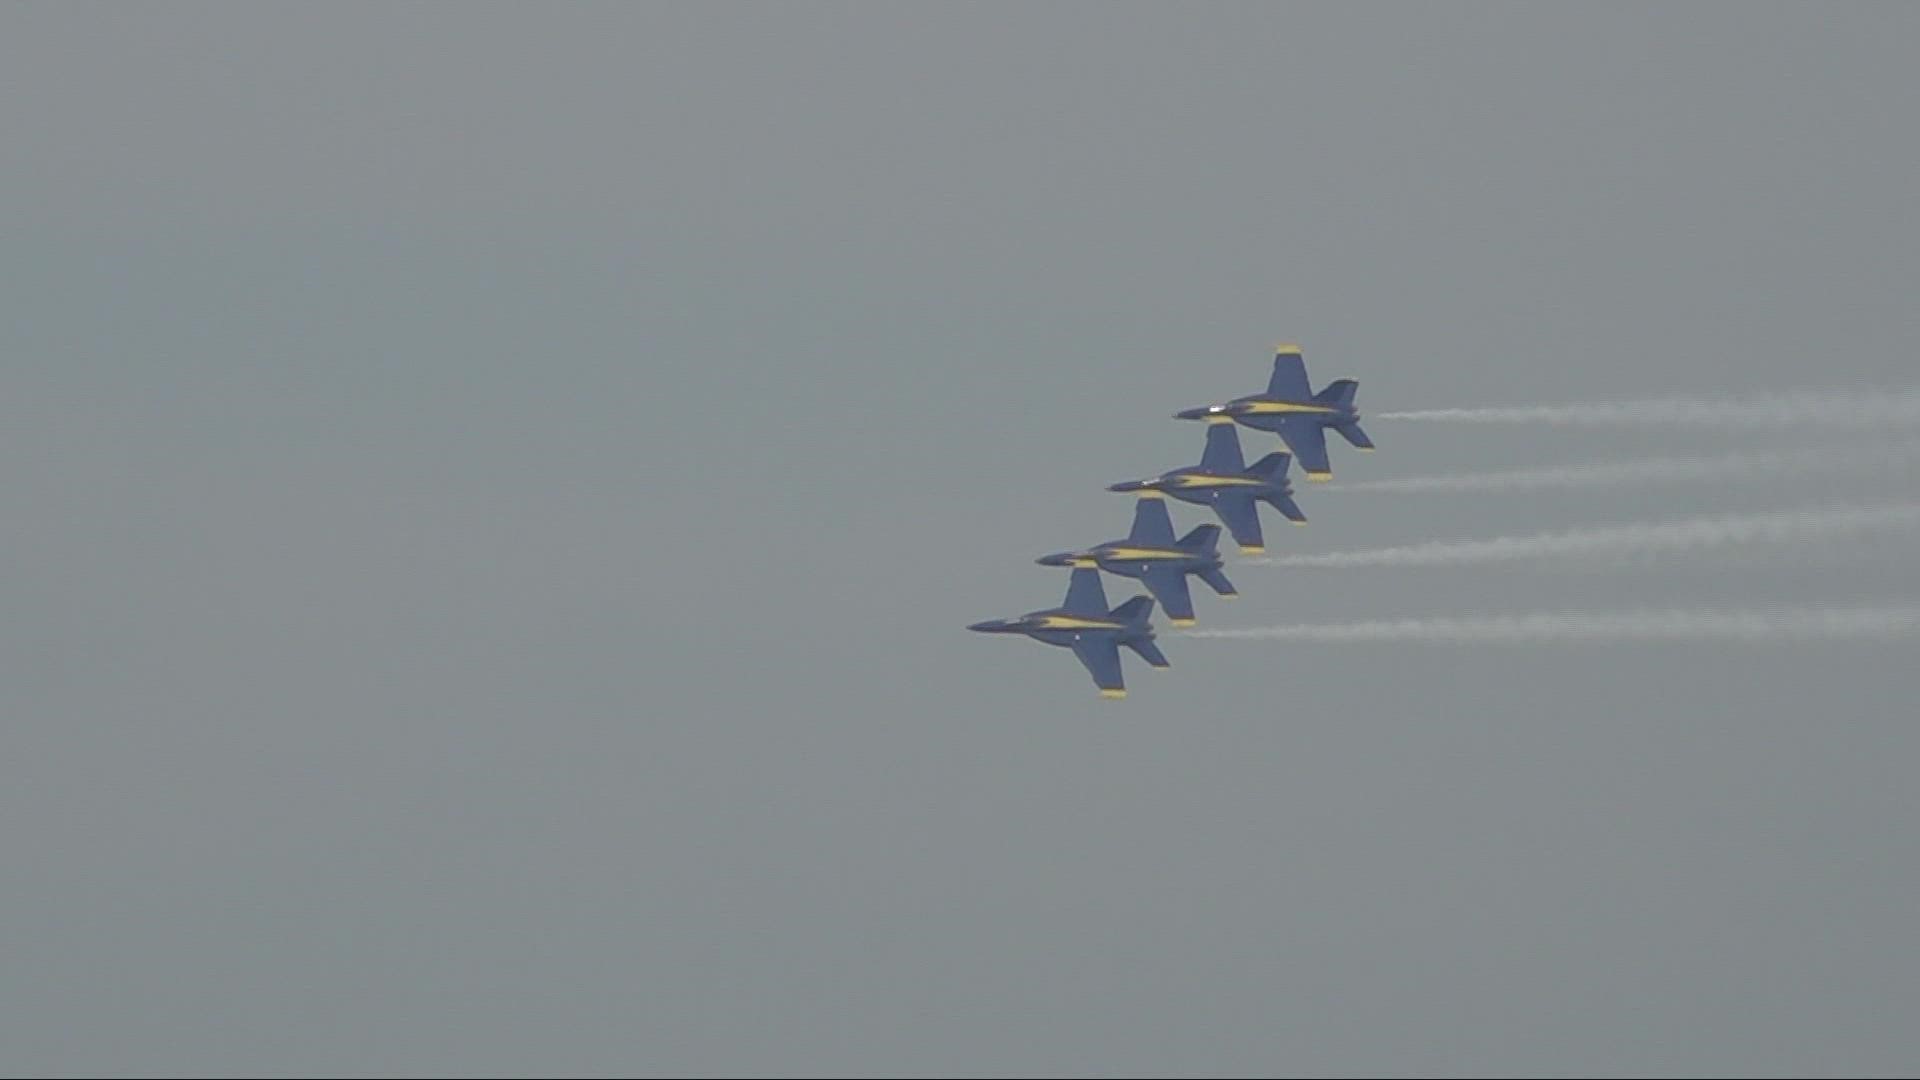 The Cleveland Air Show is based at Burke Lakefront Airport with flights from 9:30 a.m. until 4:30 p.m. each day of the event, which runs Sept. 3-5.